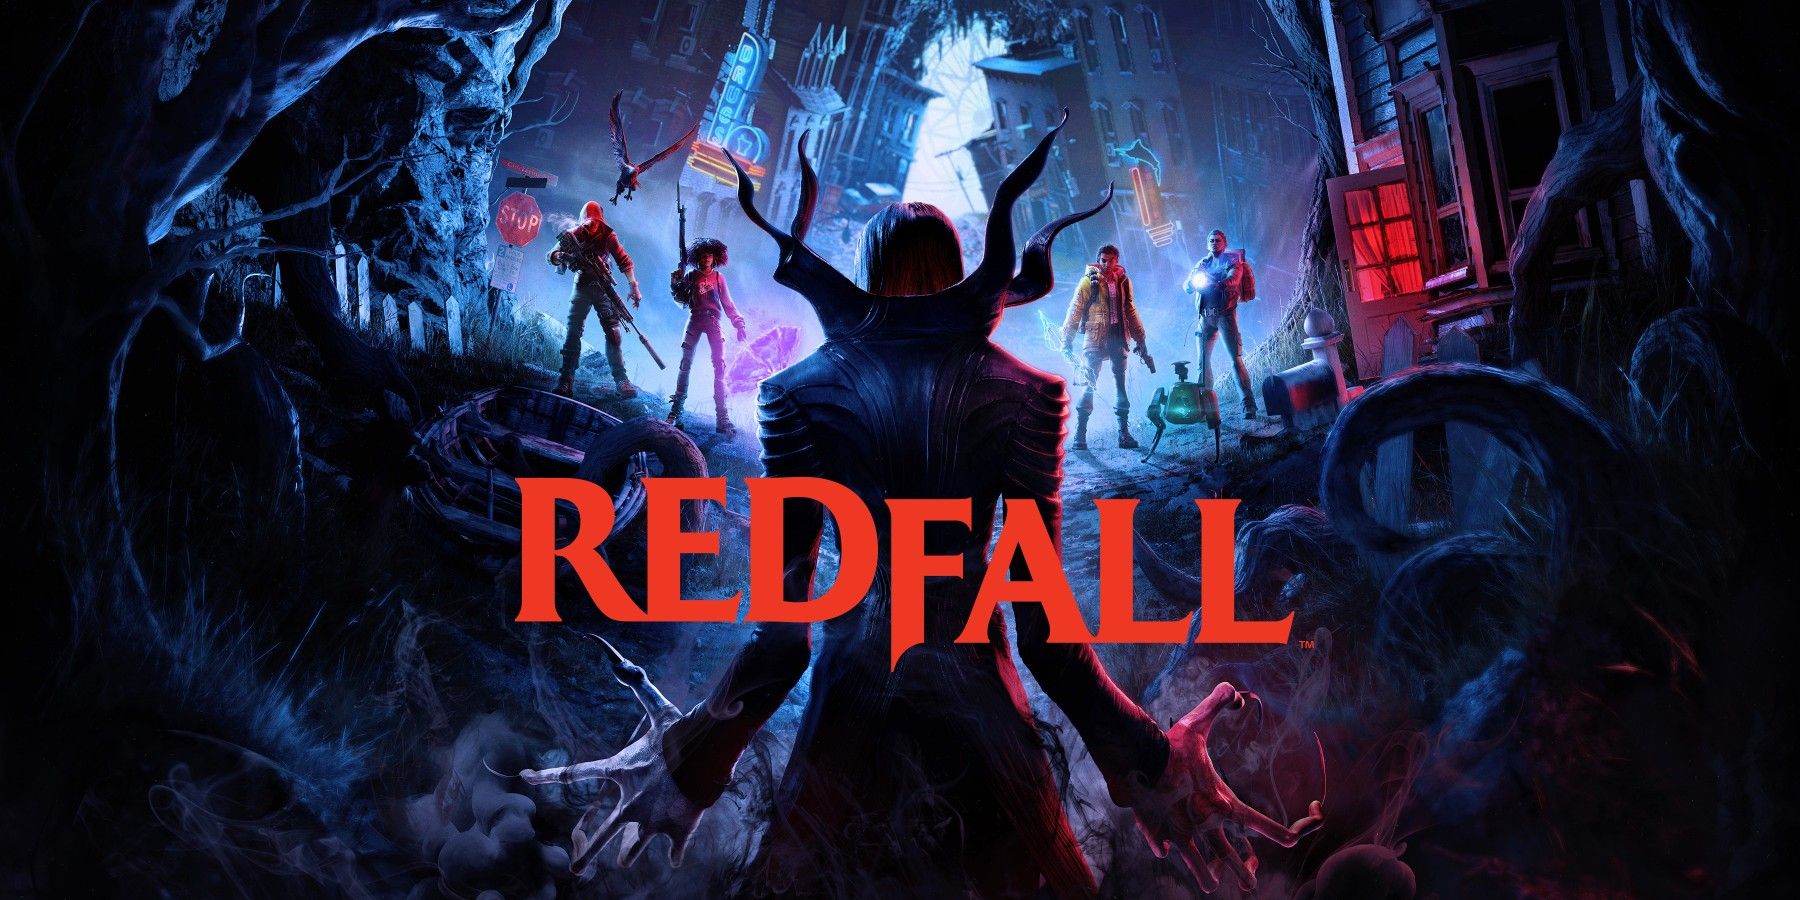 One week after its launch Redfall had 780 players online, two